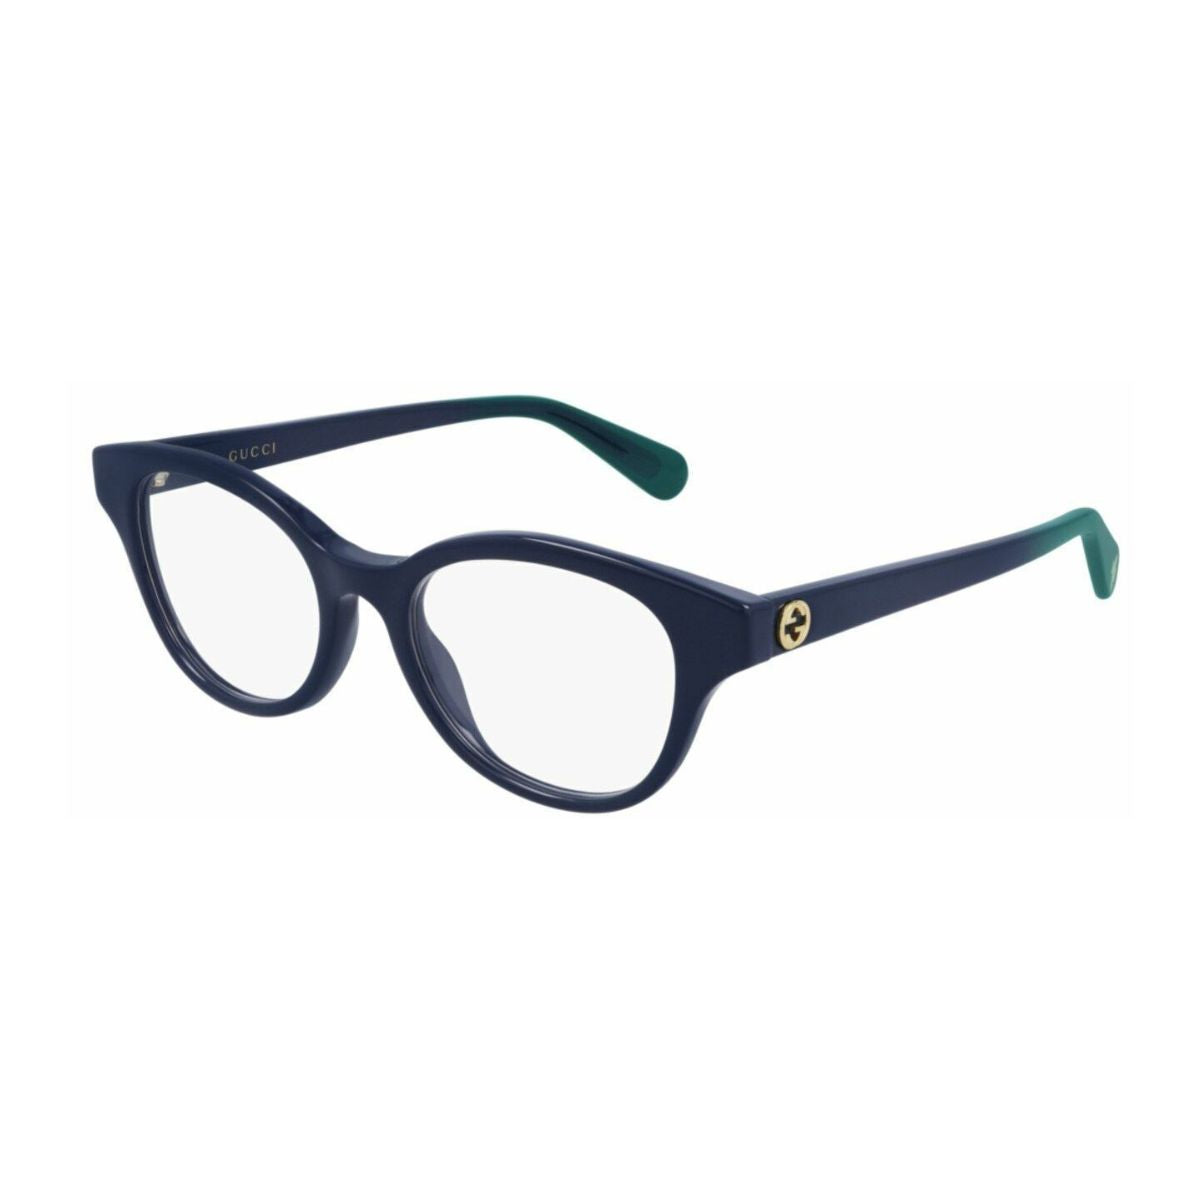 "Gucci 0924O 004 spectacle eyewear frame for women's online at optorium"